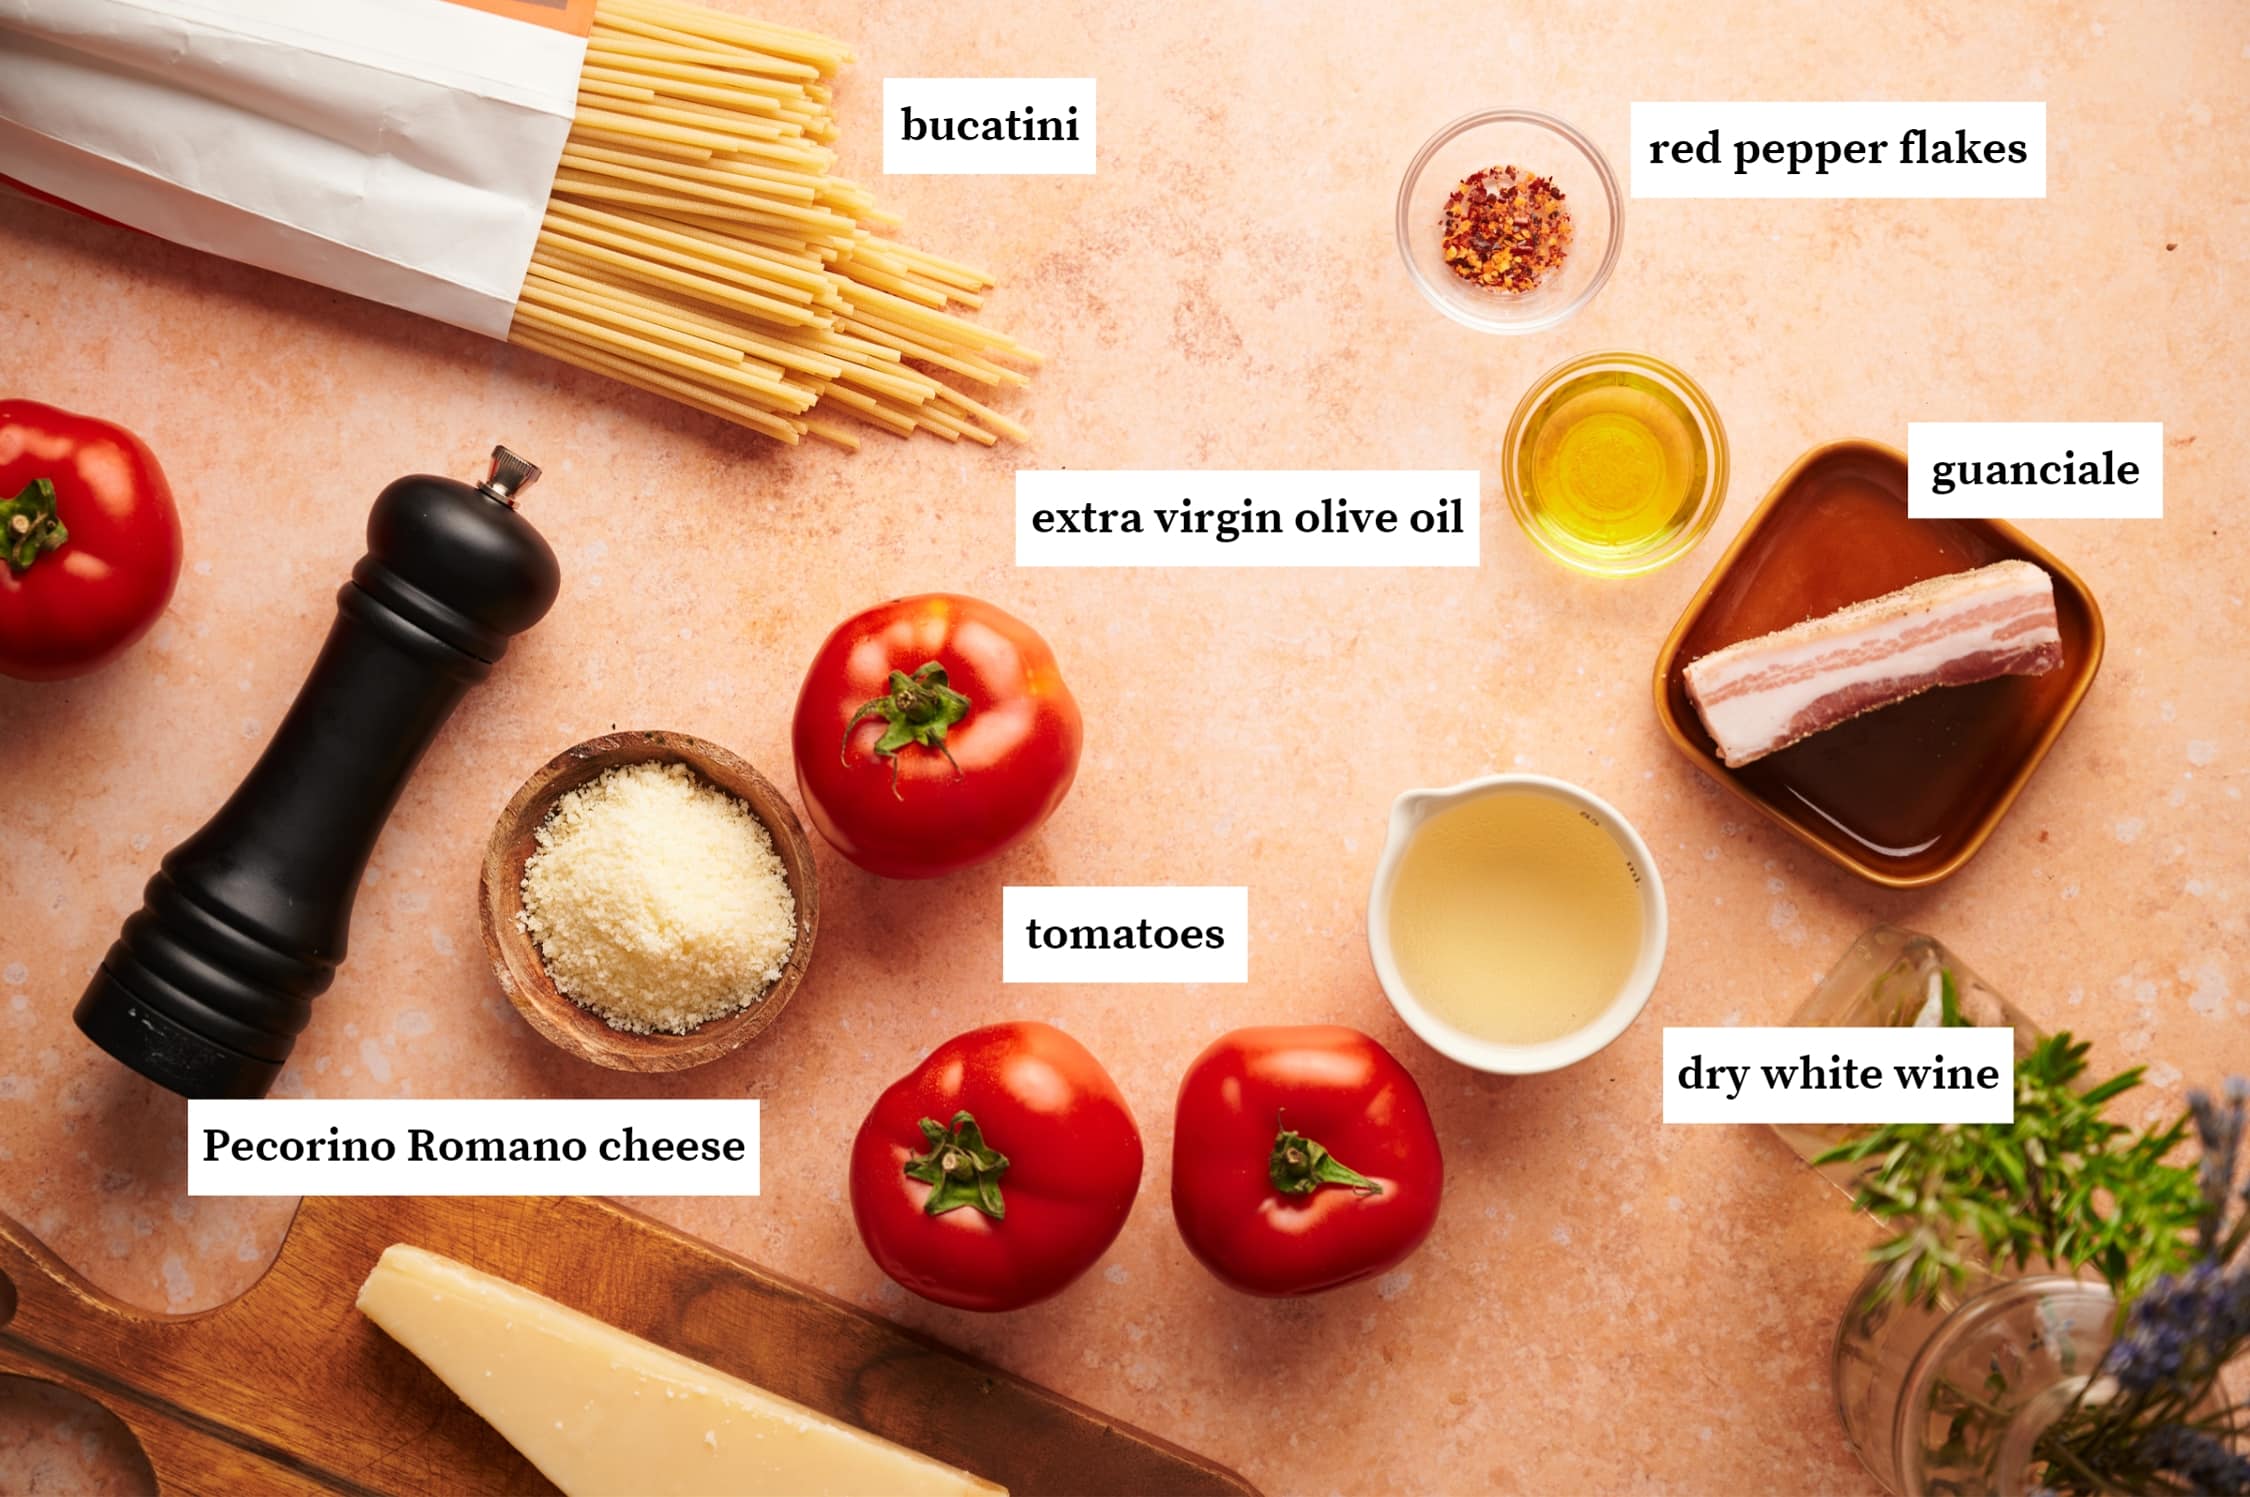 amatriciana ingredients: bucatini pasta in a paper bag, small bowls of red pepper flakes, olive oil, dry white wine, guanciale, tomatoes, cheese